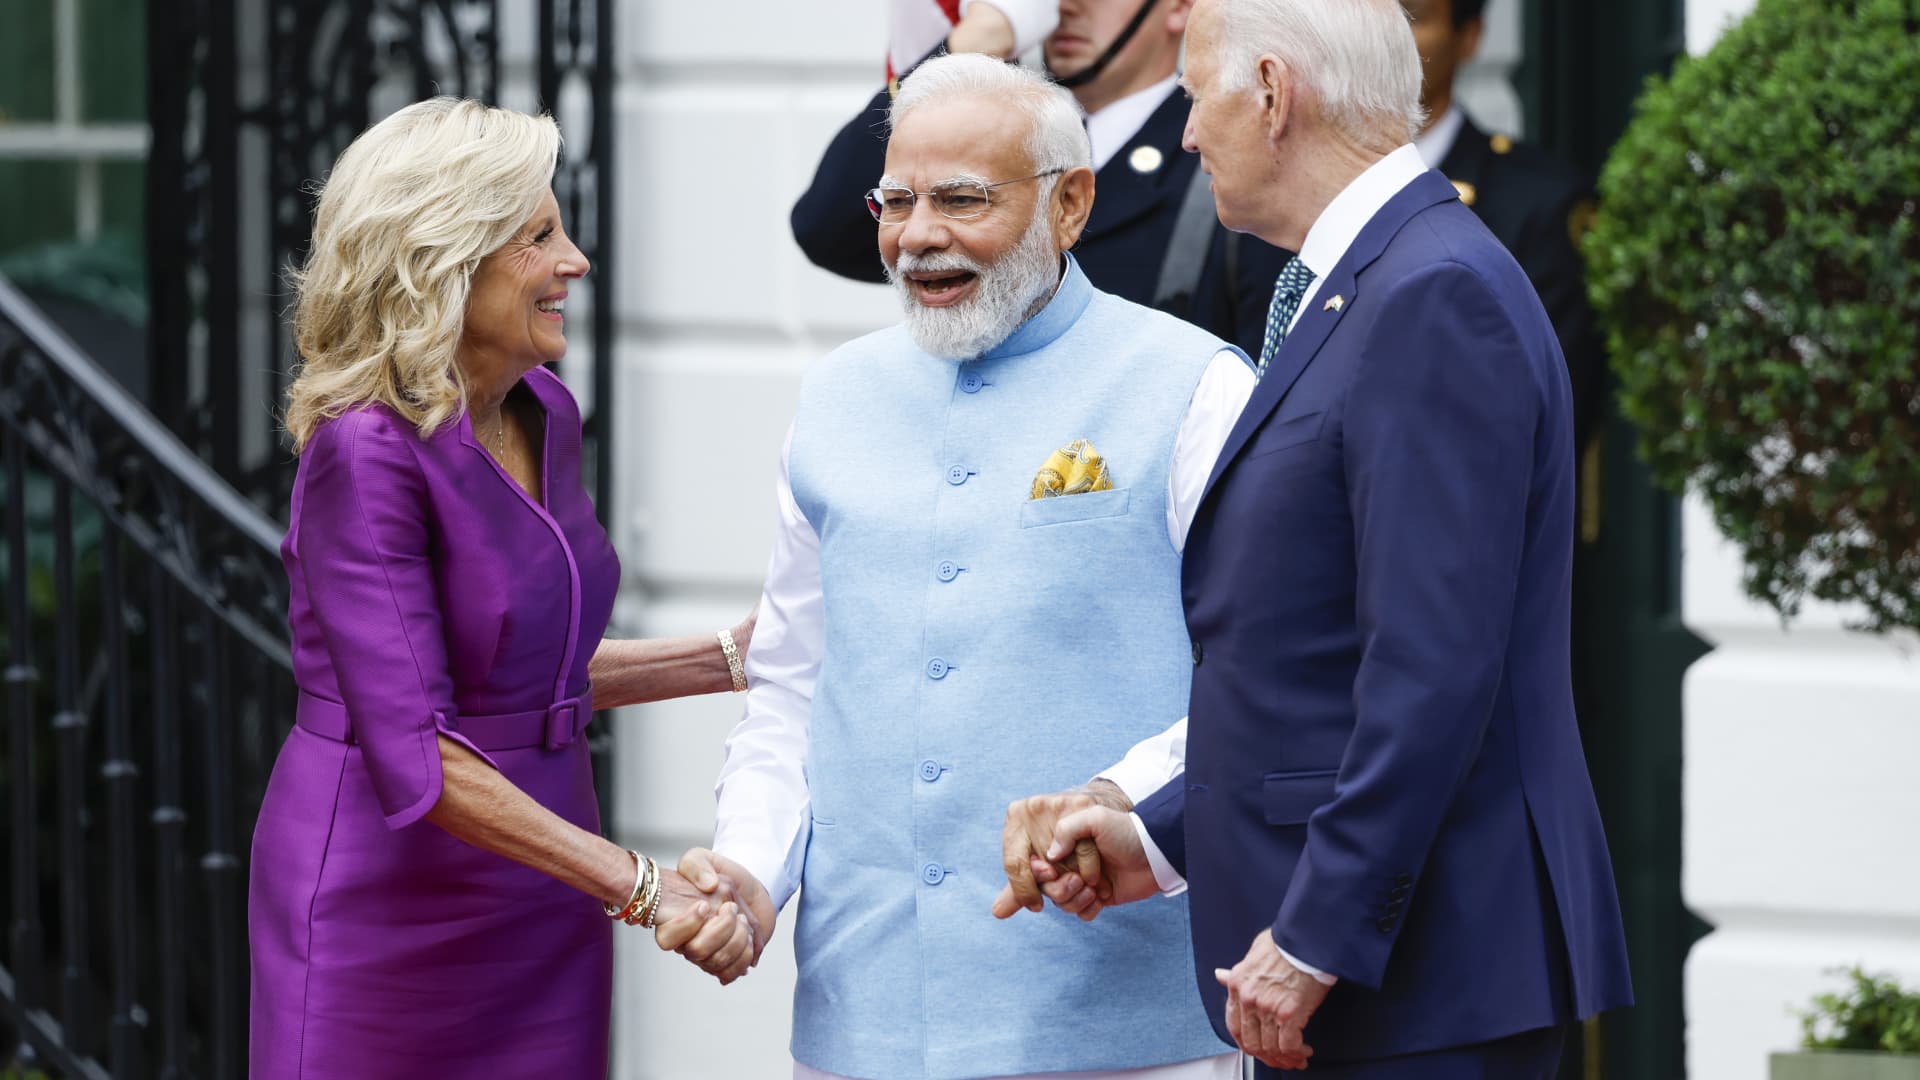 First lady Jill Biden, U.S. President Joe Biden and Indian Prime Minister Narendra Modi participate in an arrival ceremony at the White House on June 22, 2023.